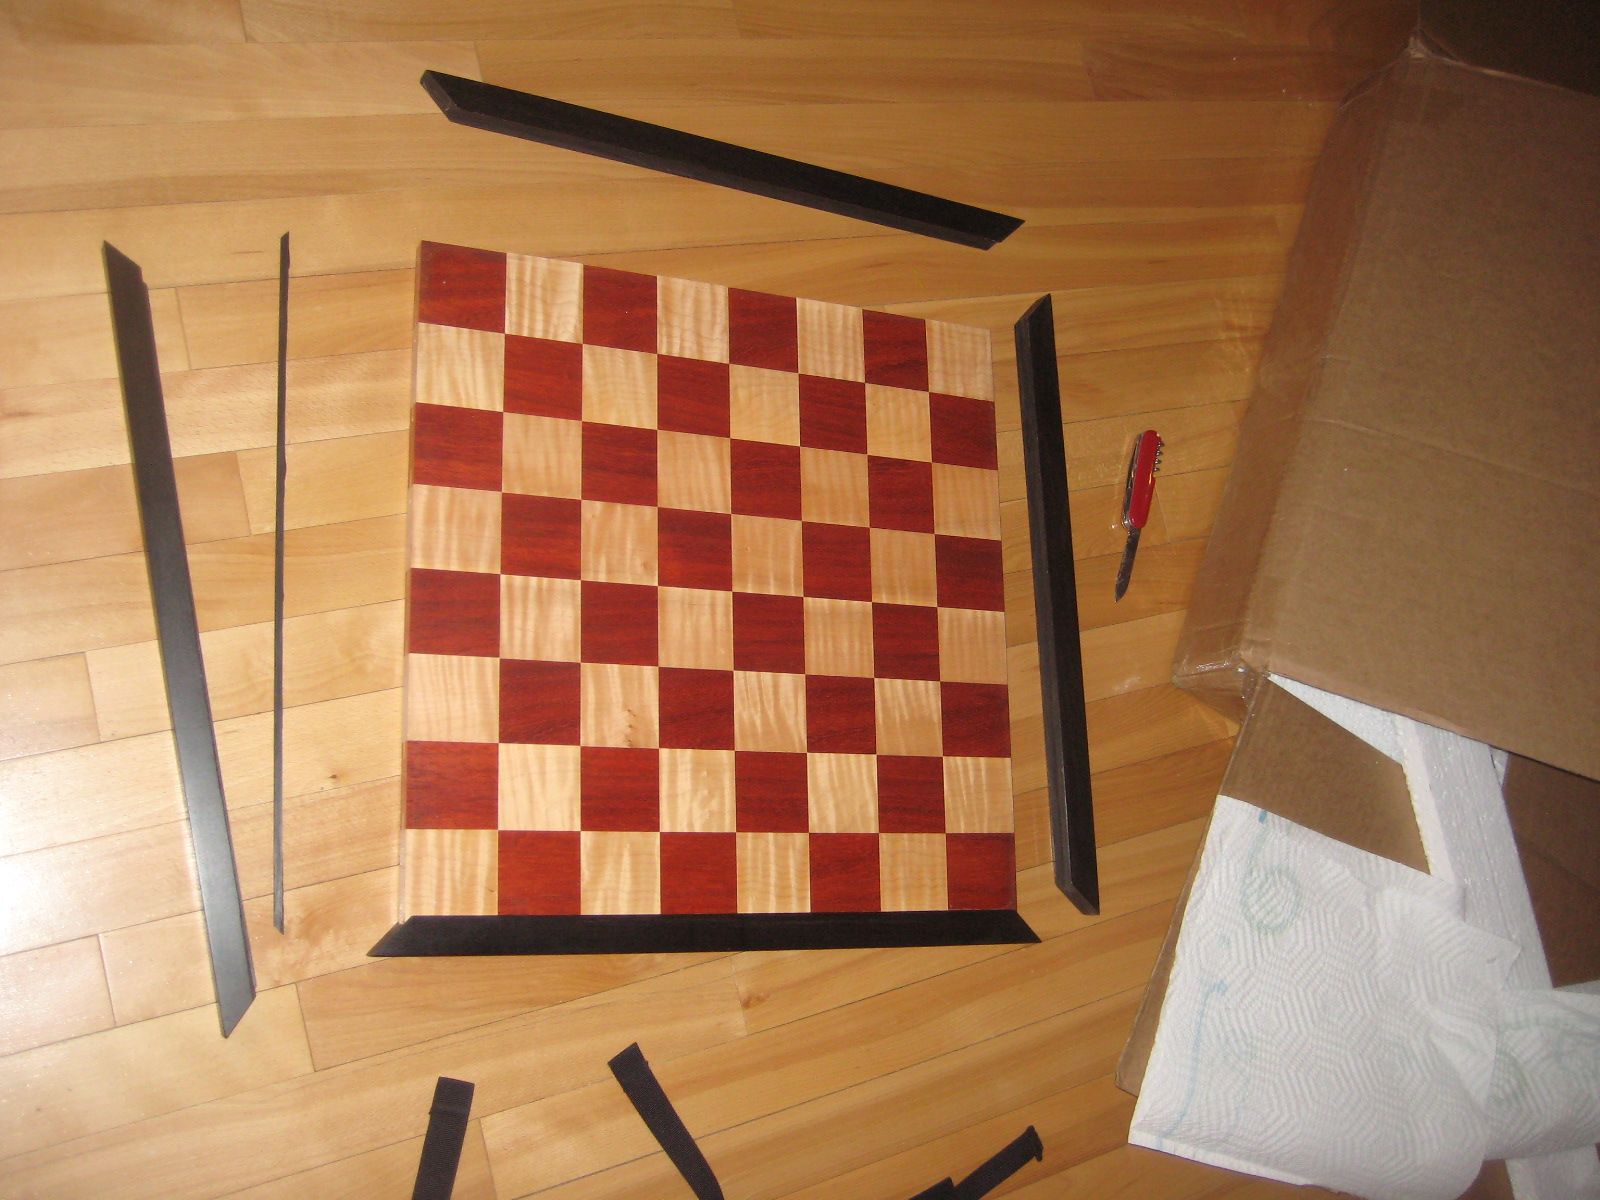 Making My Automatic Chessboard - Chess Forums 